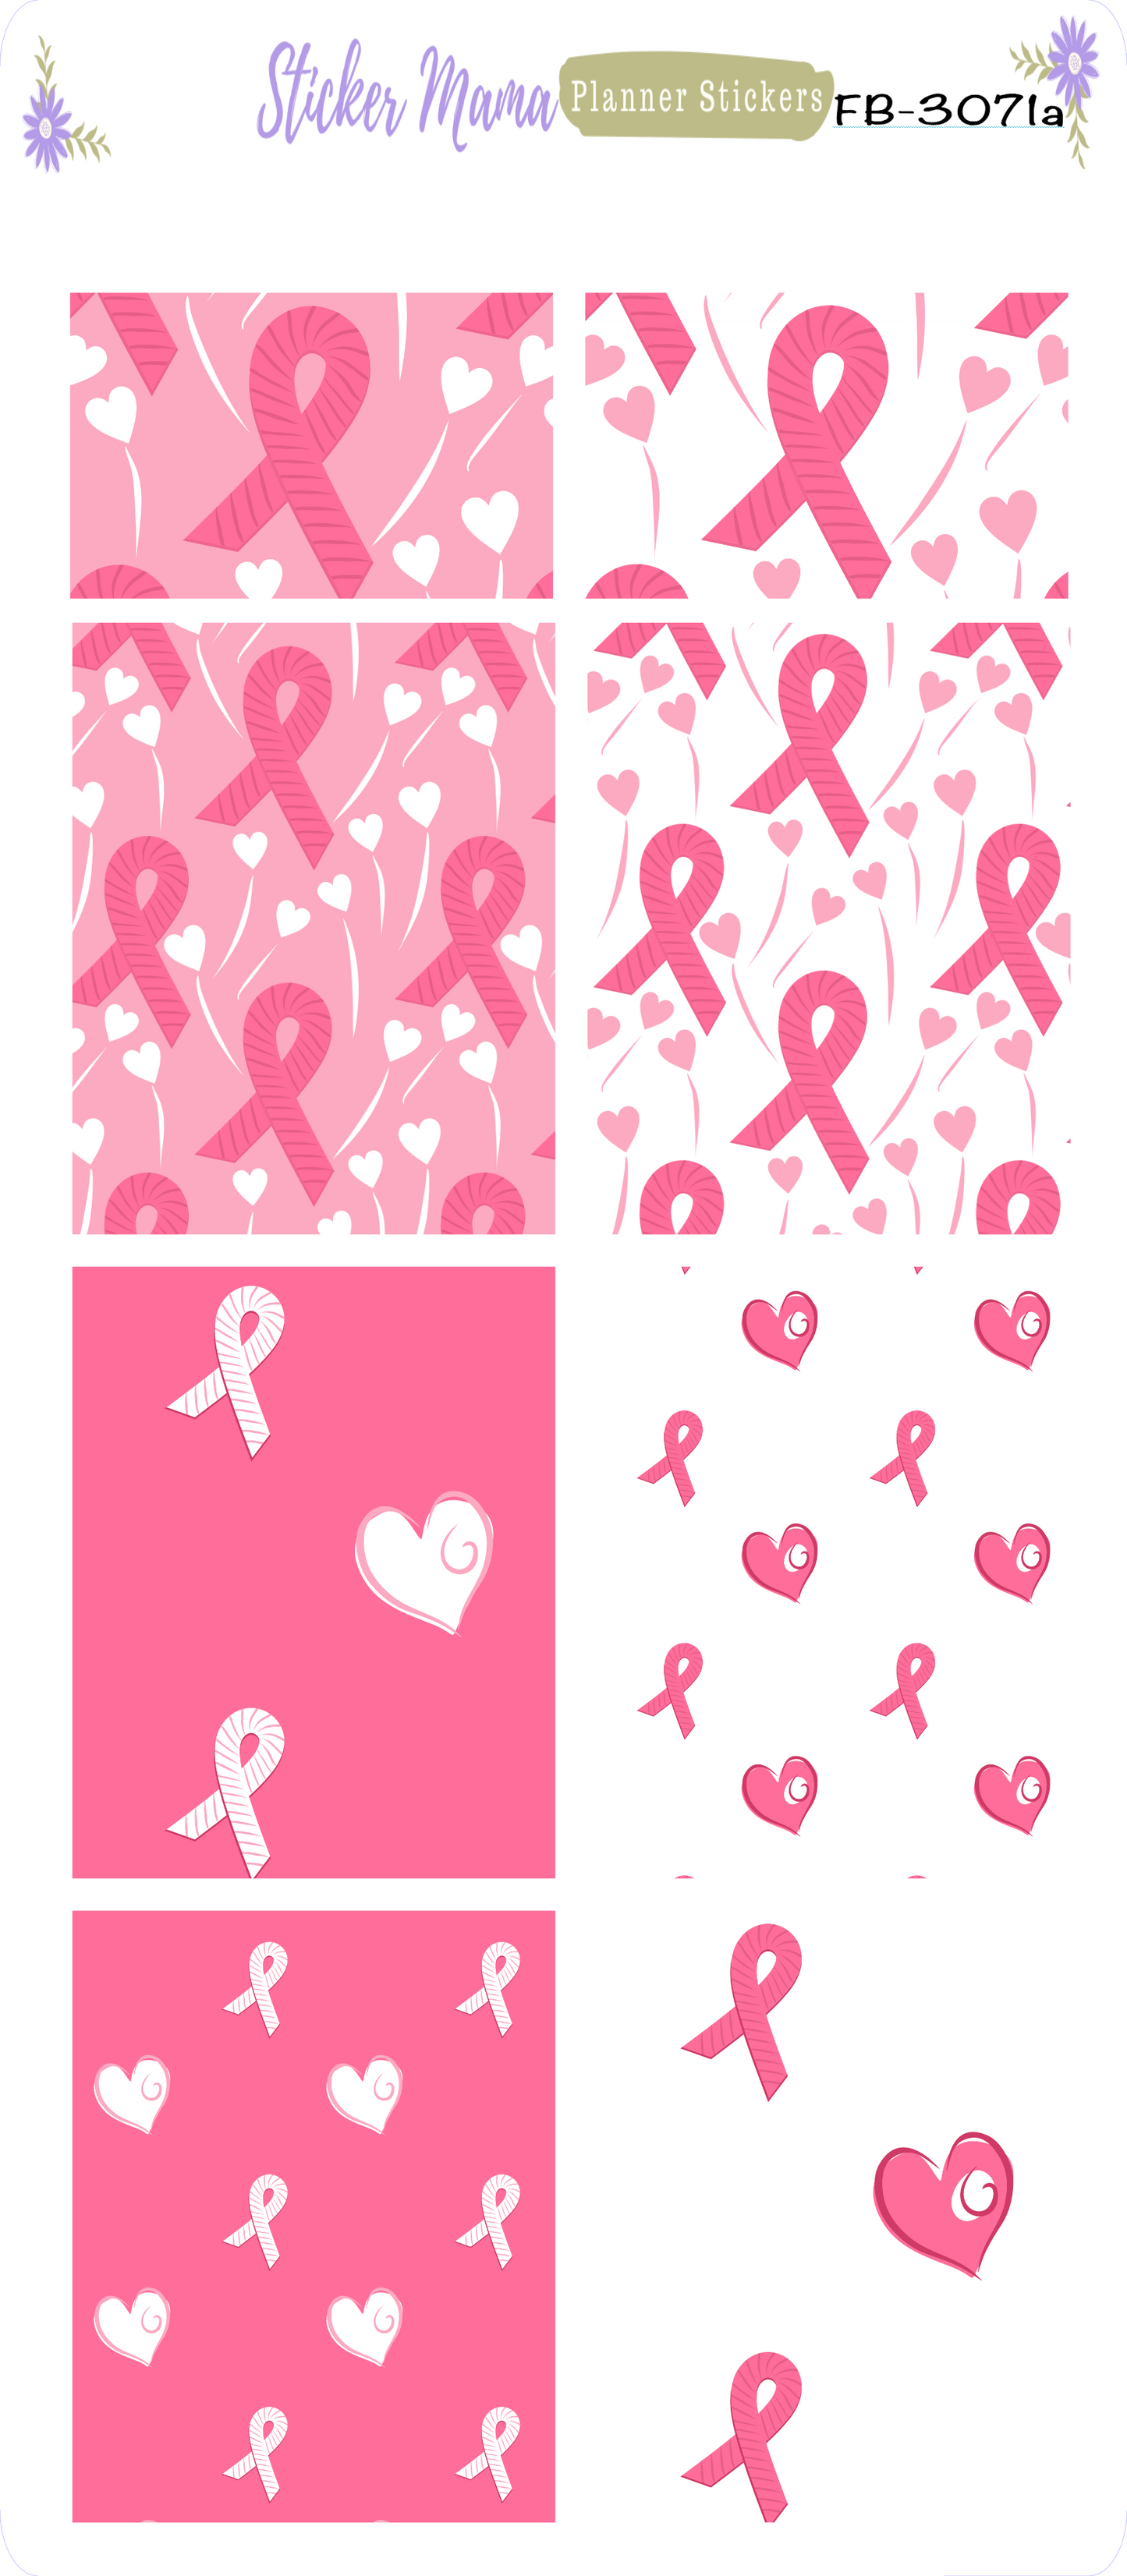 FB-3071 - October Breast Cancer Stickers - FULL BOX Stickers  - Planner Stickers - Full Box for Planners